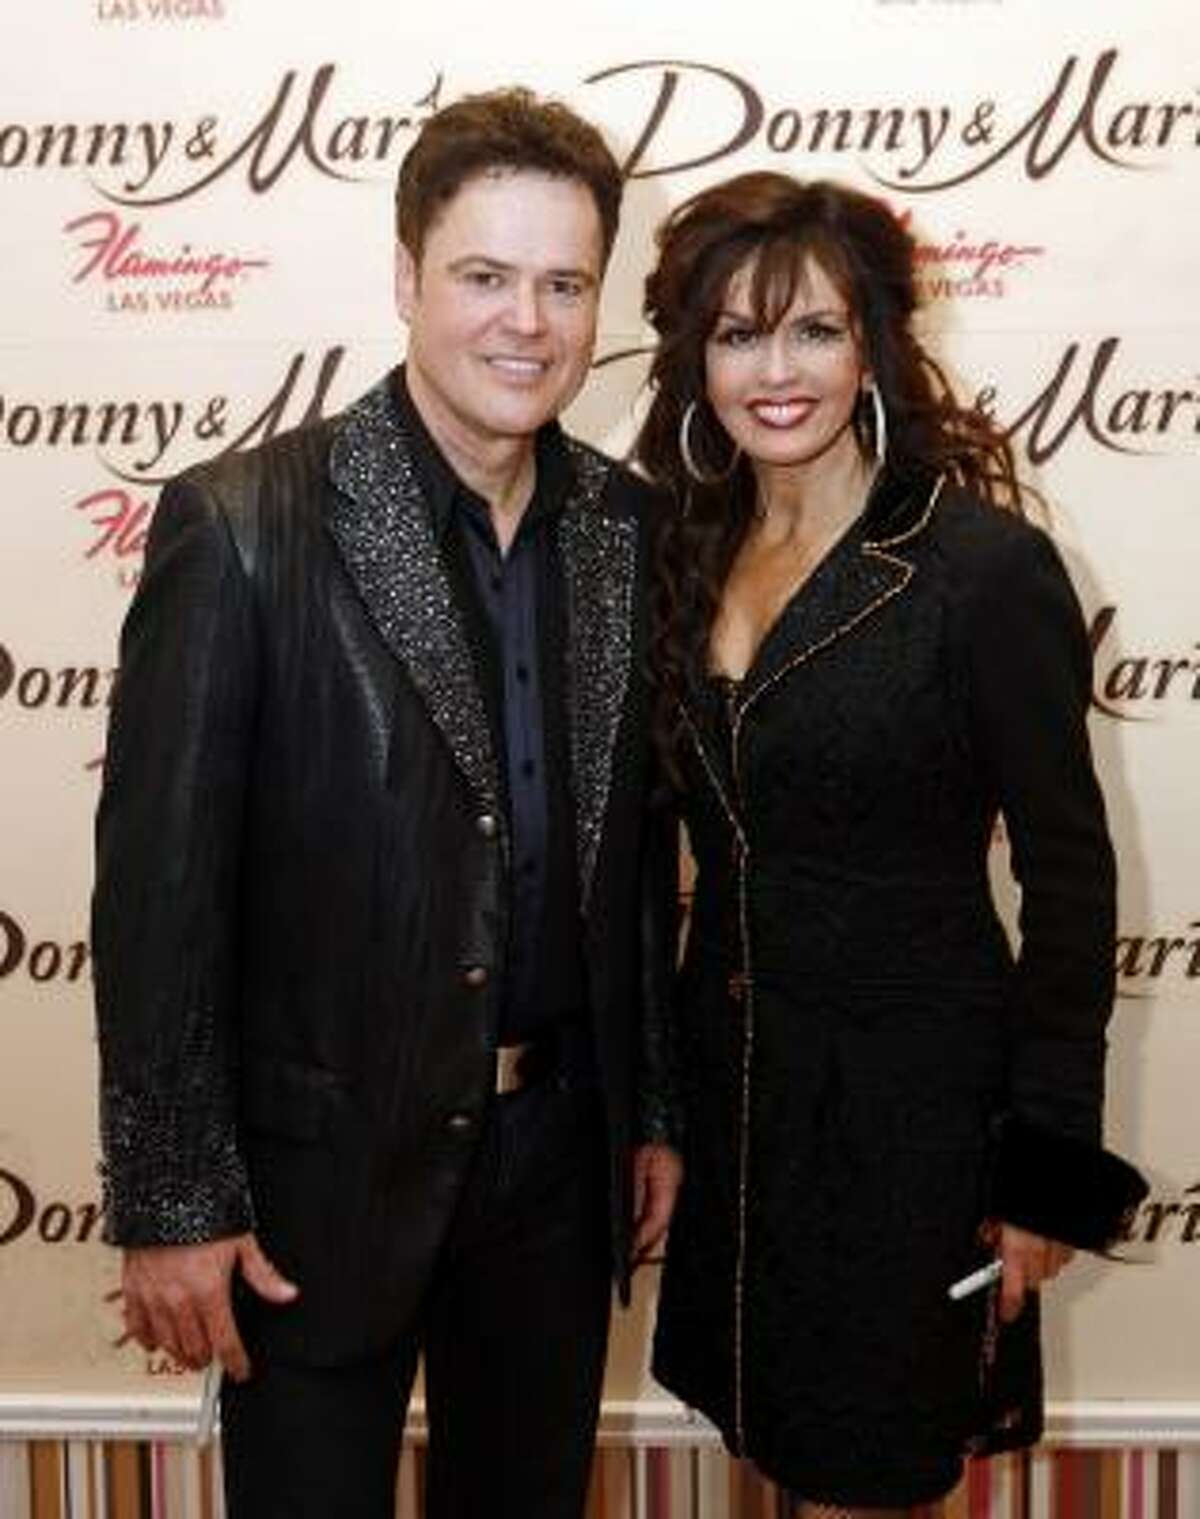 Donny & Marie set Albany tour date